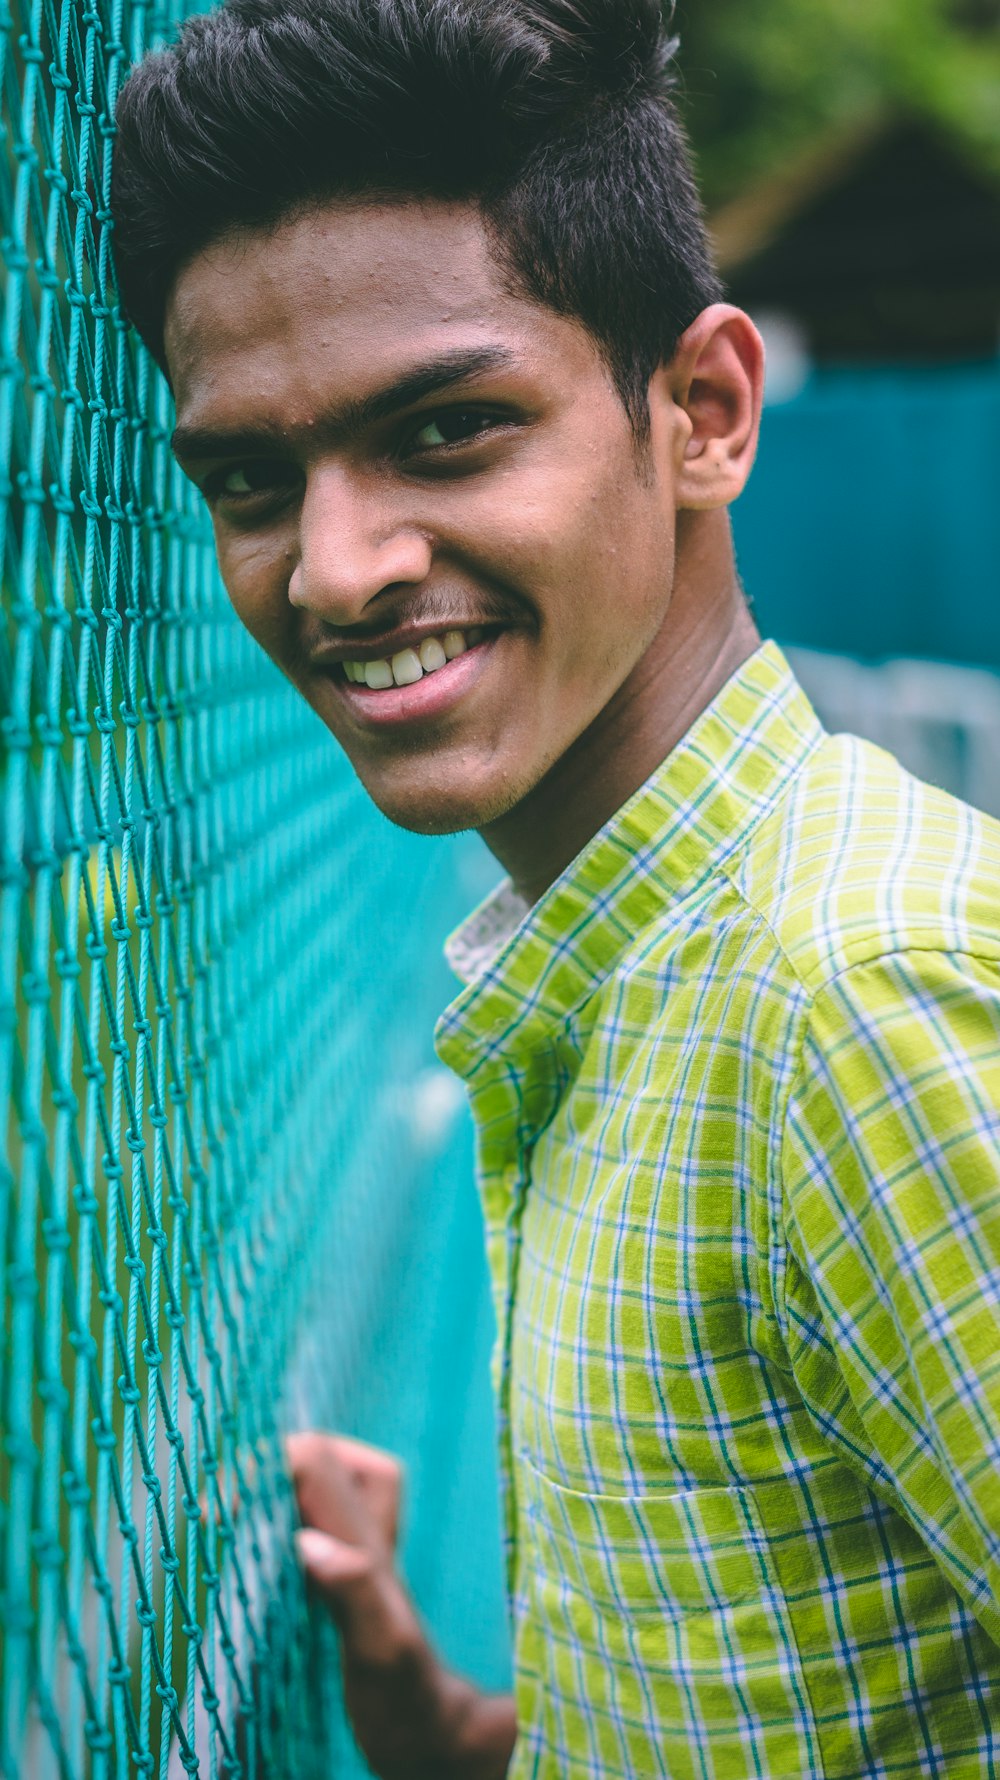 man wearing green collared top standing beside green cyclone fence